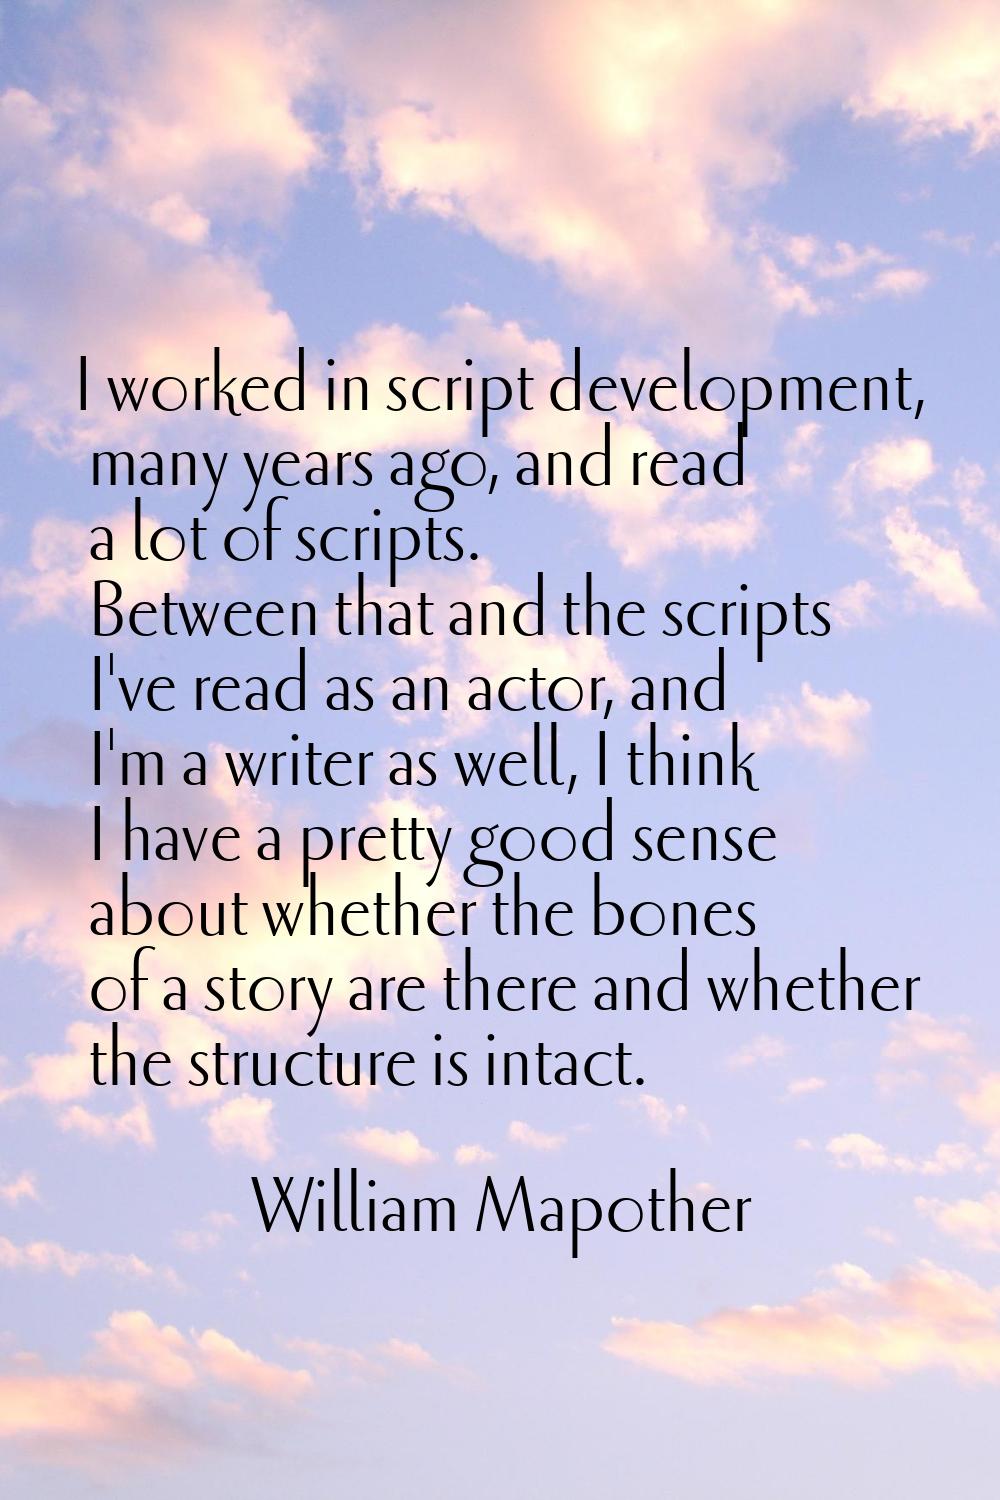 I worked in script development, many years ago, and read a lot of scripts. Between that and the scr